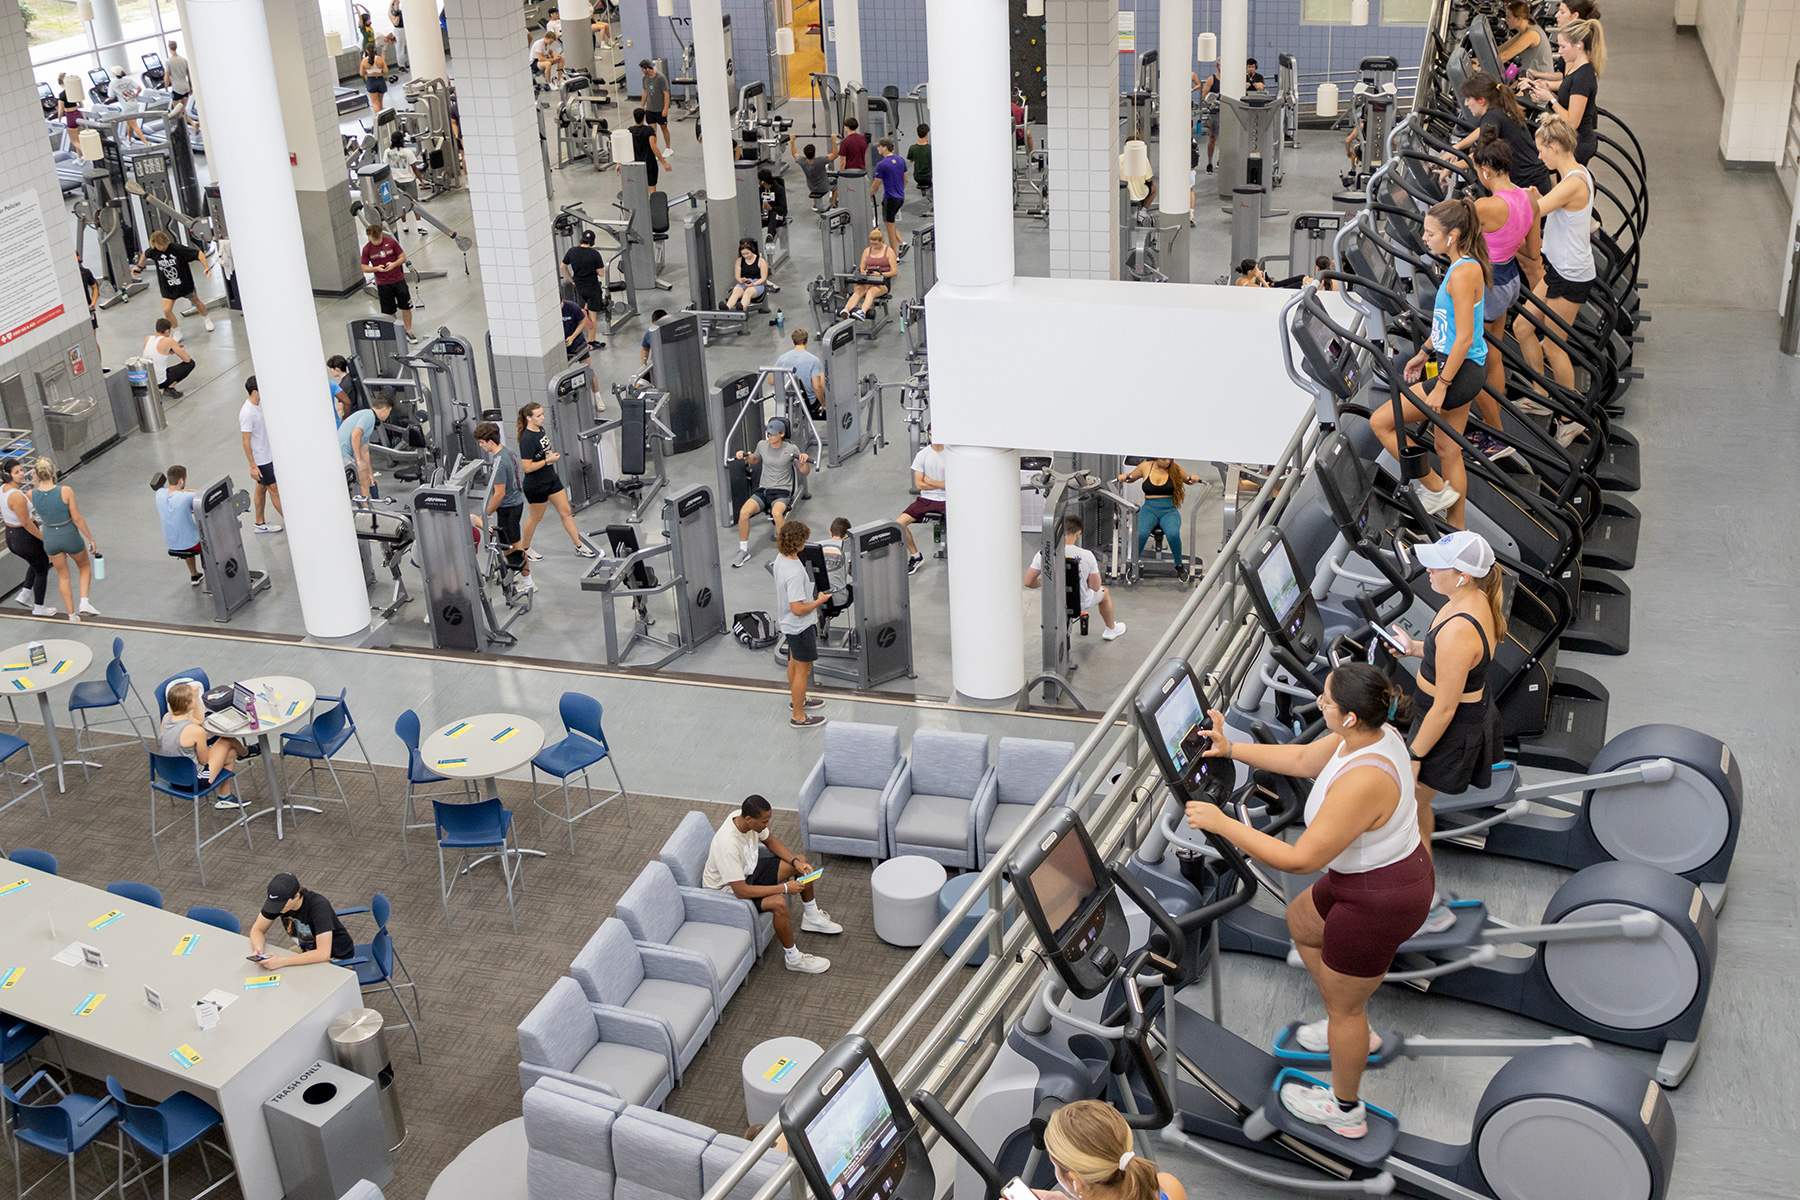 Find a Fitness Class, Campus Recreation